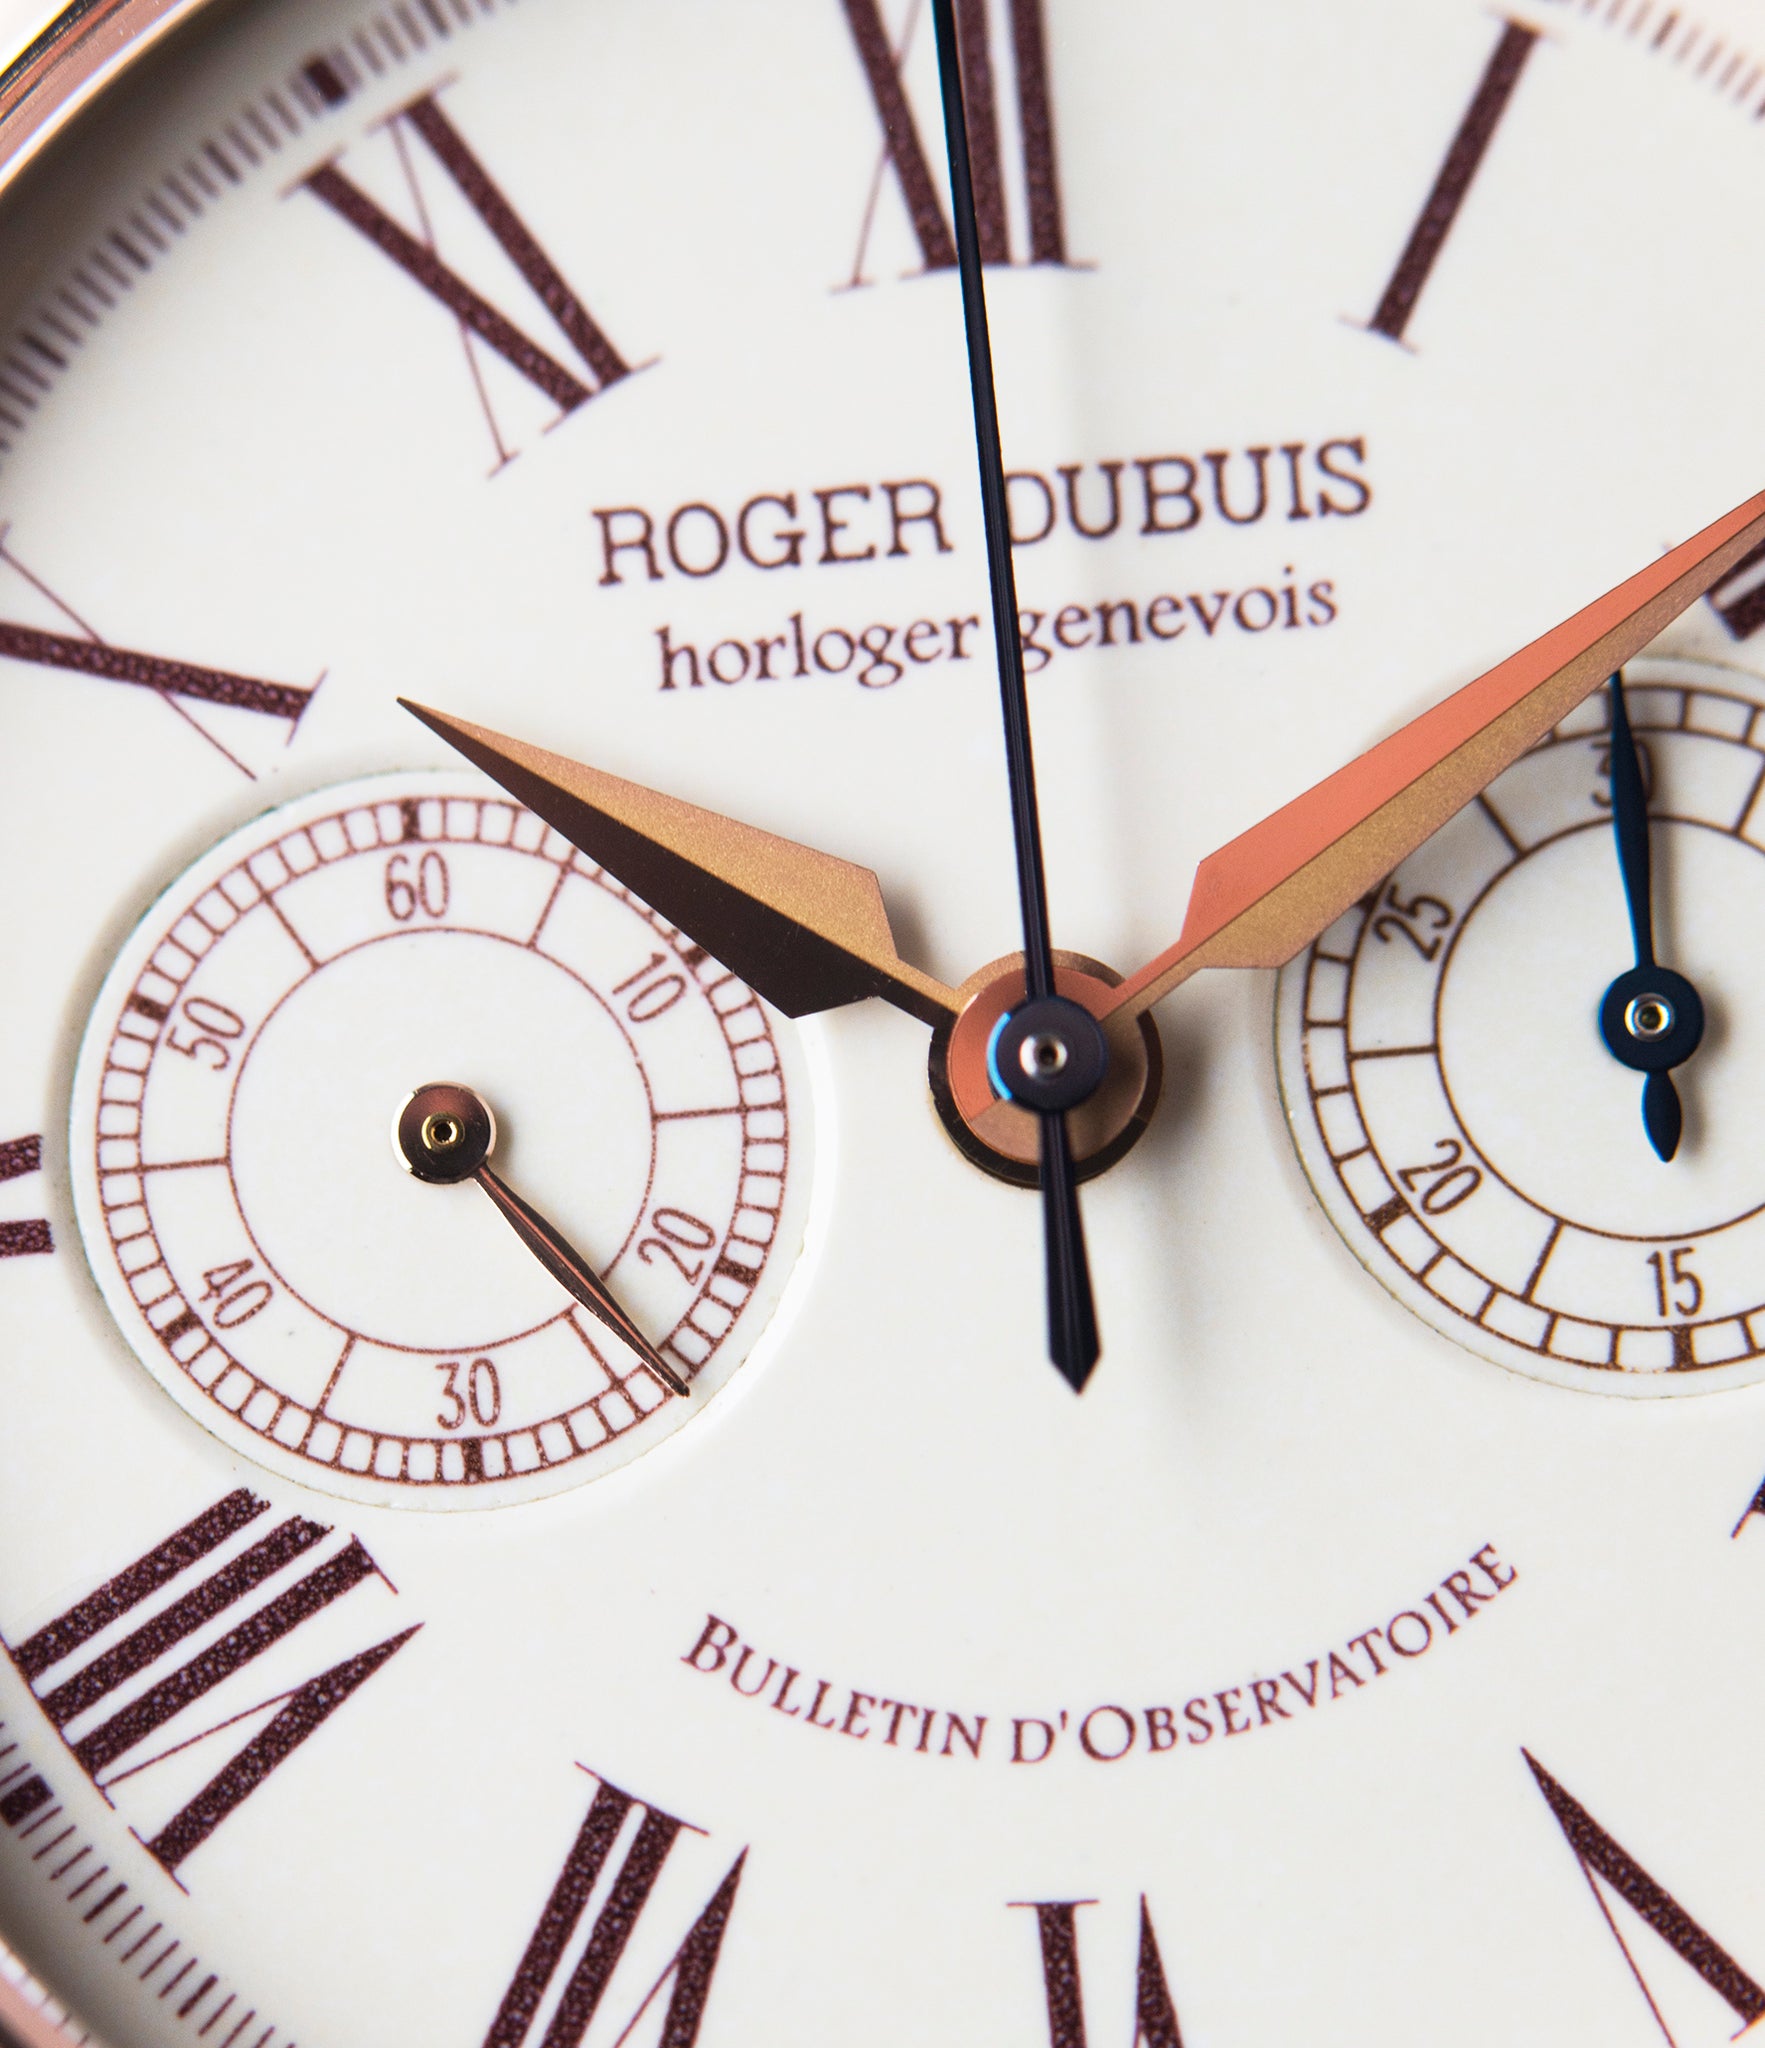 white enamel dial Roger Dubuis Hommage Chronograph H37 565 rose gold pre-owned watch online at A Collected Man London UK specialist rare watches